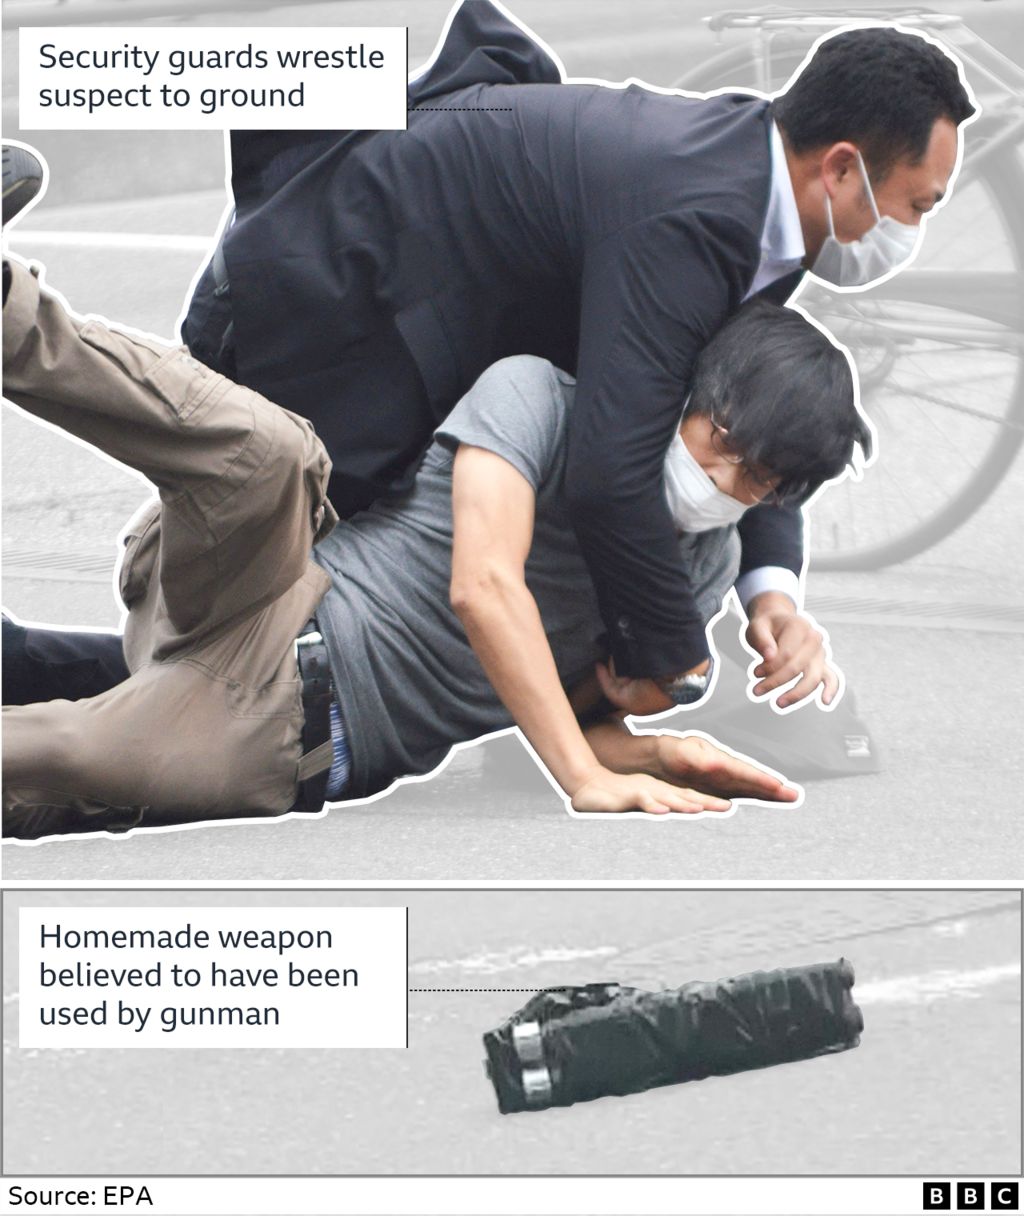 Security officials wrestle suspect to the ground, and the murder weapon